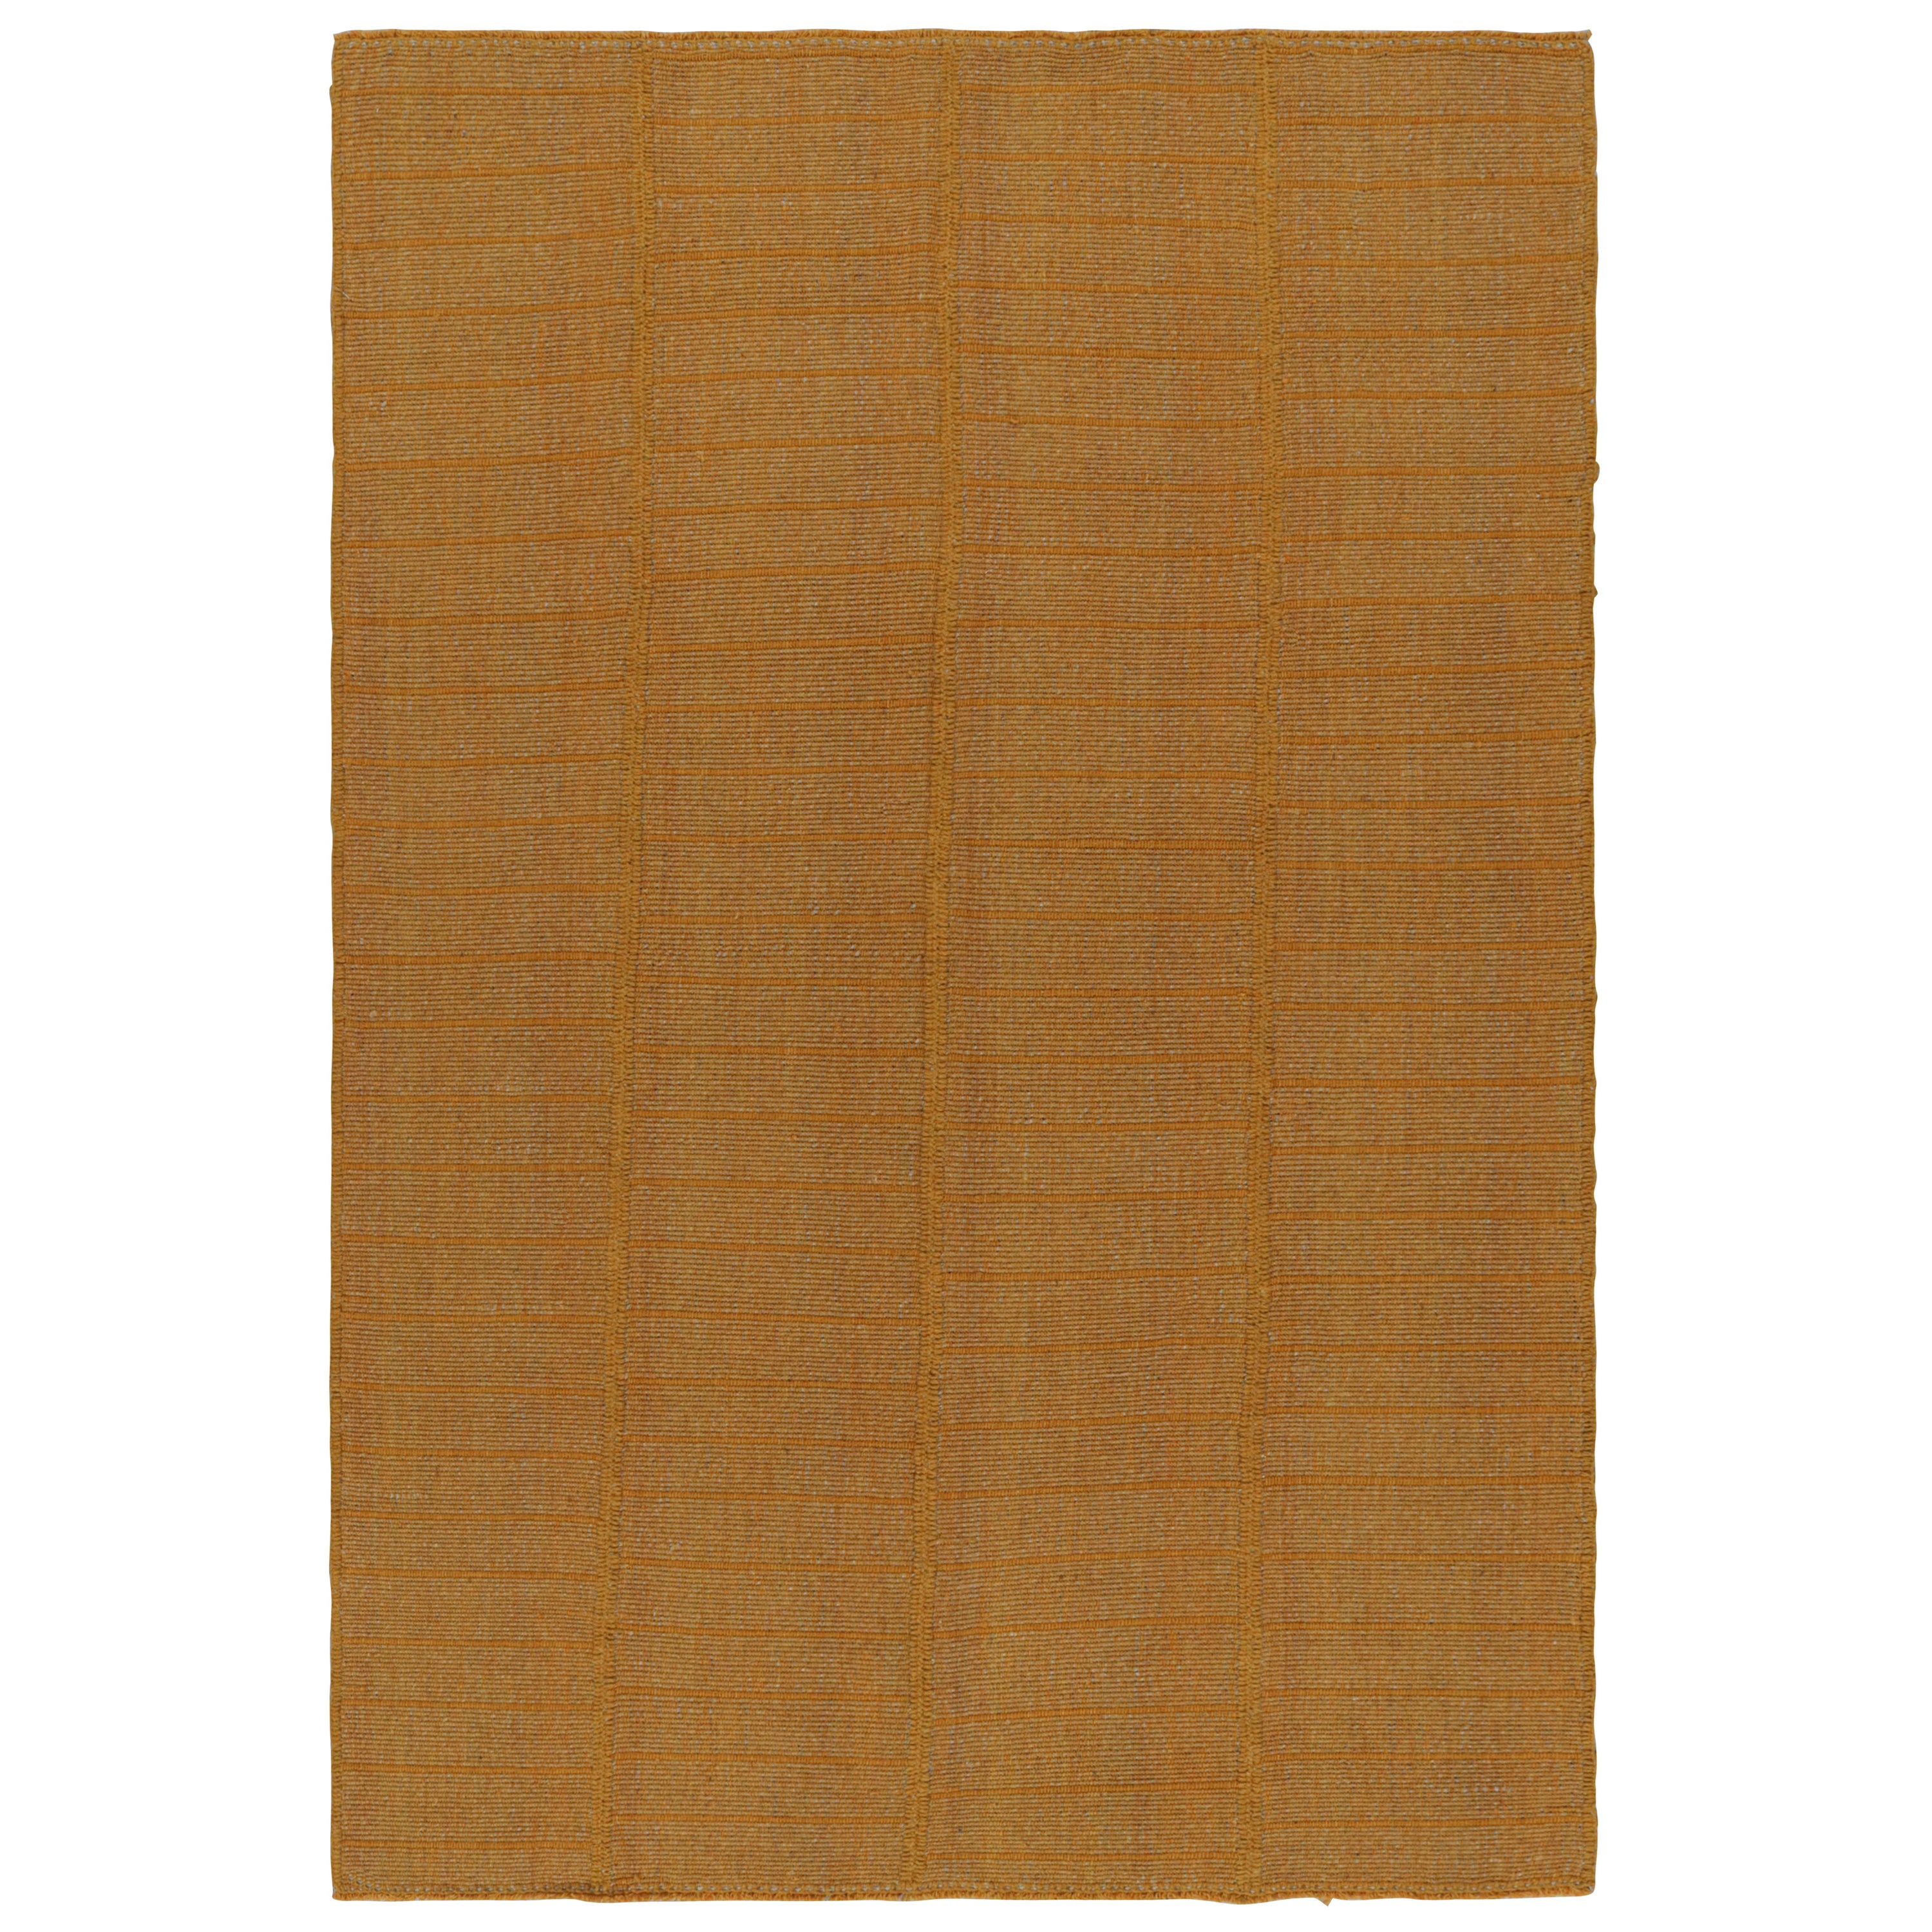 Rug & Kilim’s Modern Kilim Rug with Textural Stripes in Gold and Orange Tones For Sale